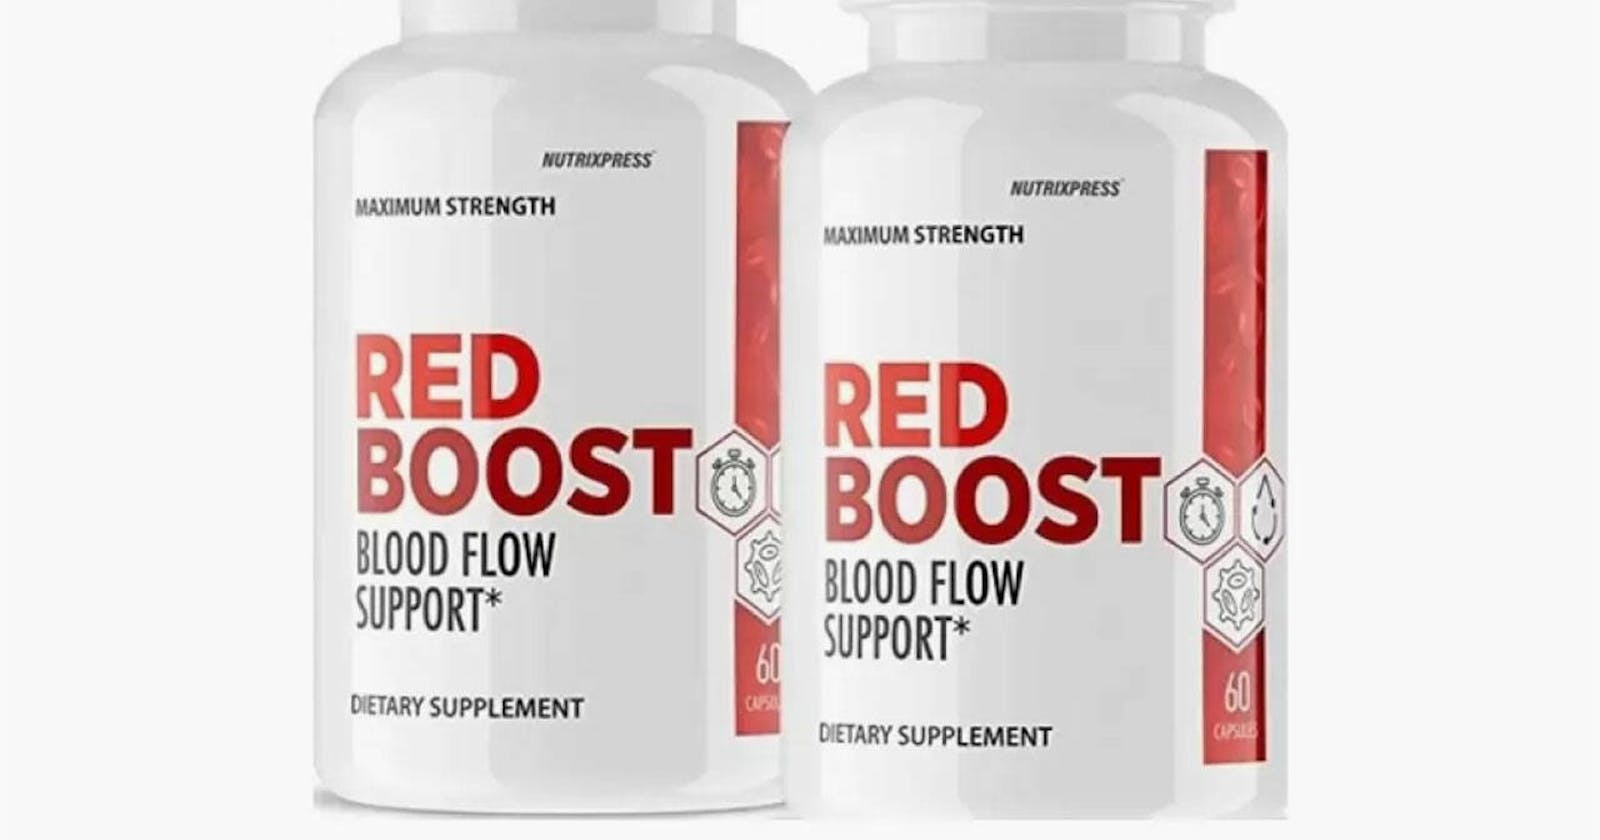 Red Boost Reviews ShockinG Official Website Claims Examined Truth Revealed (Red Boost Powder$39 RBP)